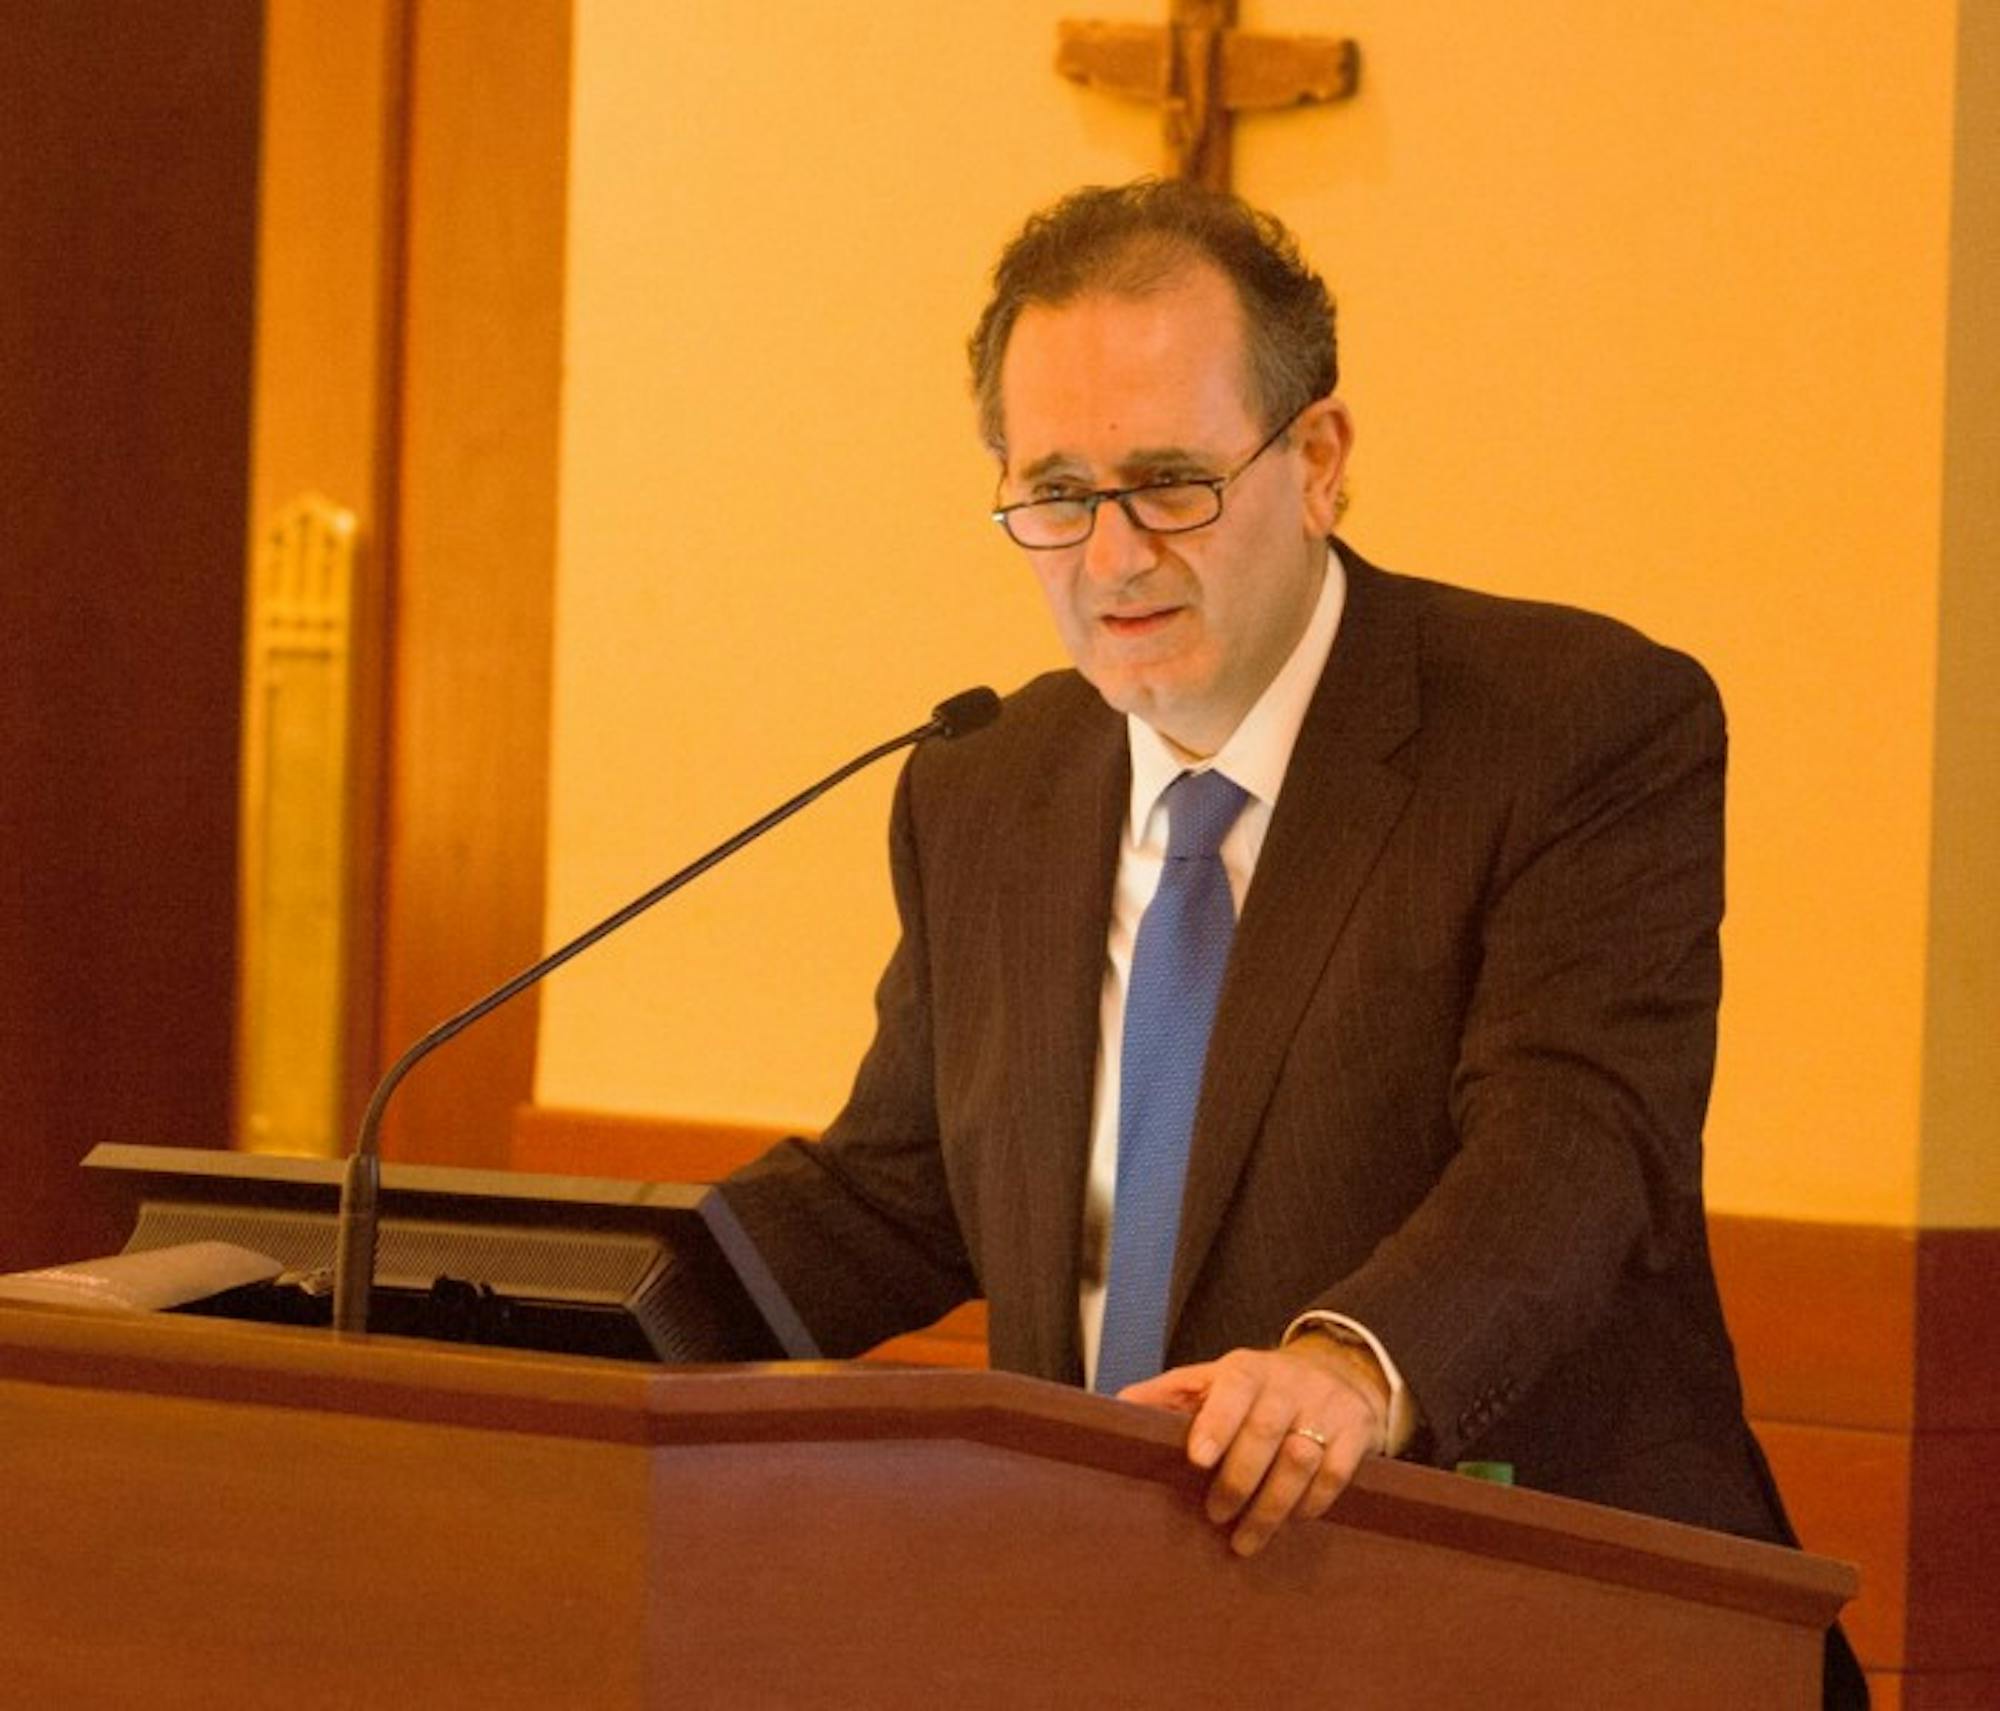 WEB 20151111, 20151111, Chris Collins, Eck Visitors Center, Inside the financial and administrative changes at the vatican